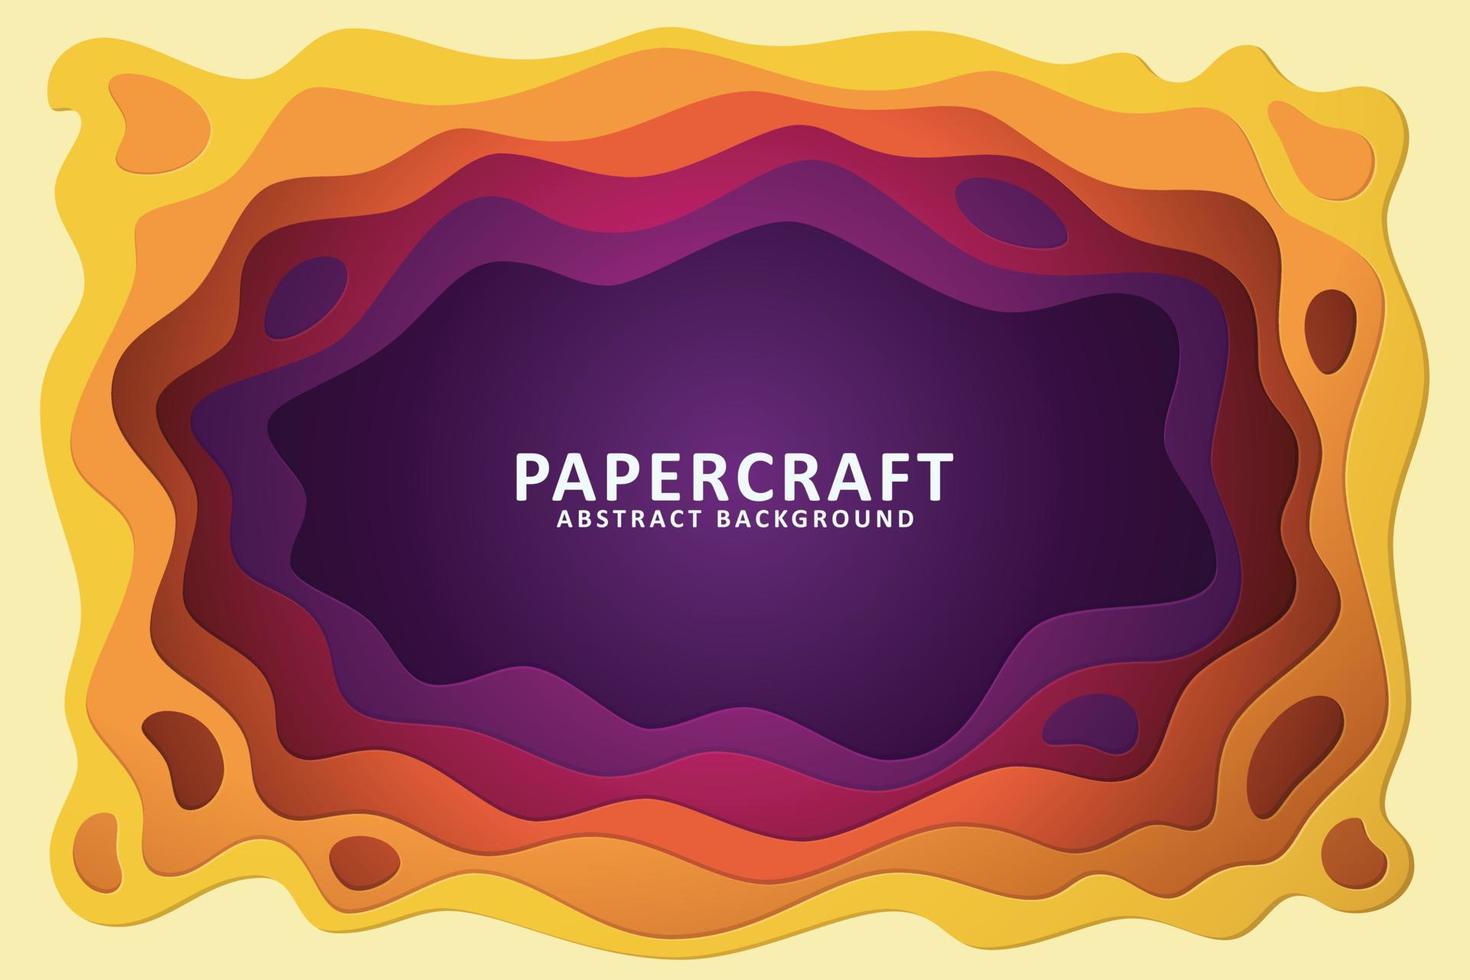 Abstract background with paper cut shape vector